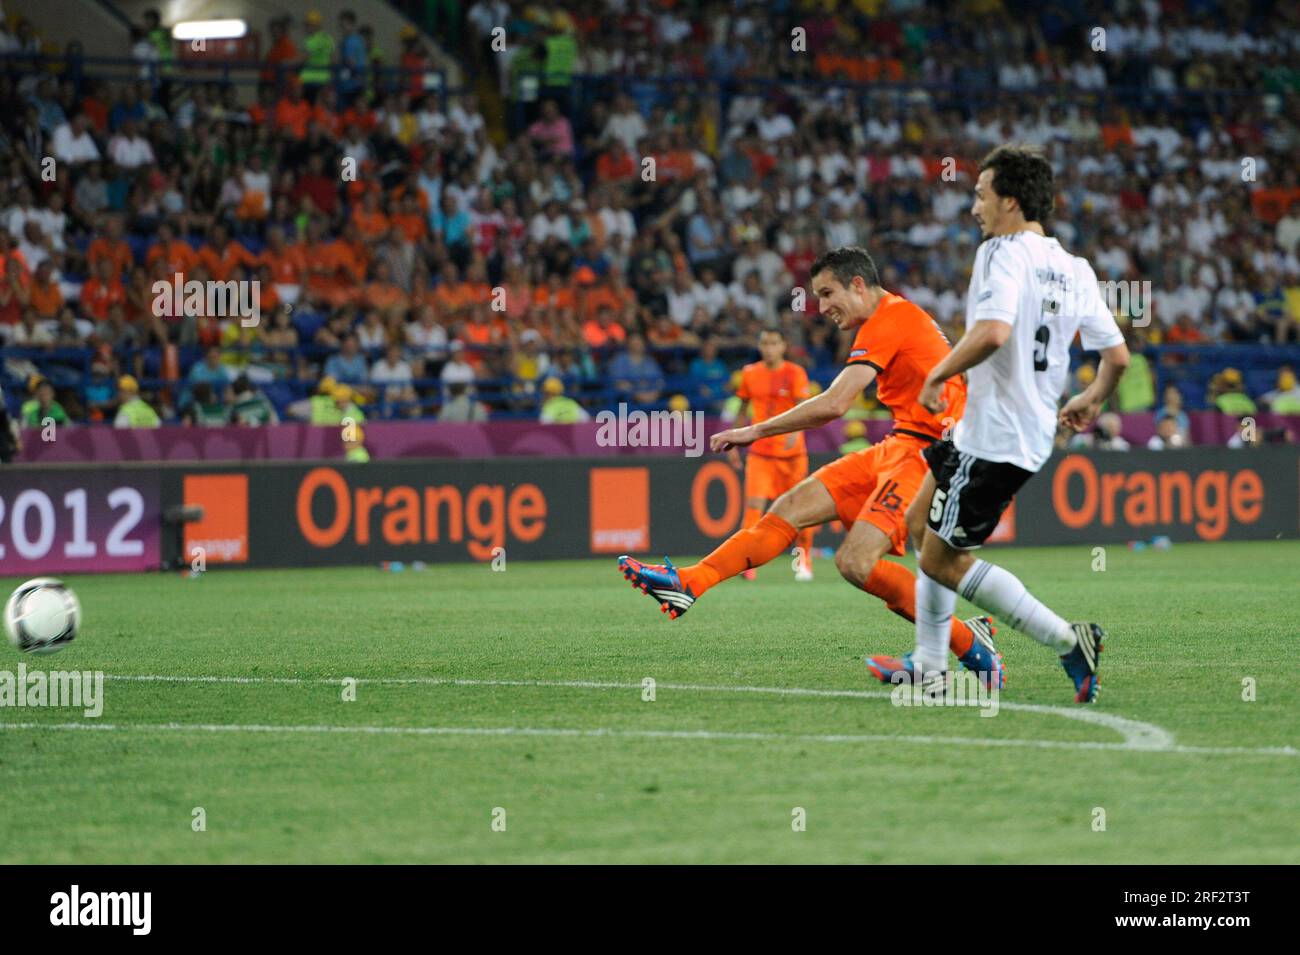 ARCHIVE PHOTO: Robin van PERSIE turns 40 on August 6, 2023, goal to 1-2 by Robin VAN PERSIE (NED) versus Mats HUMMELS (GER, re). Action, goal shot. Group game, preliminary round, game 12, group B, Netherlands (NED) - Germany (GER), on June 13th, 2012 in Kharkov/Ukraine Soccer UEFA EURO 2012 P olen/Ukraine from June 8th. - 01.07.2012. ? Stock Photo